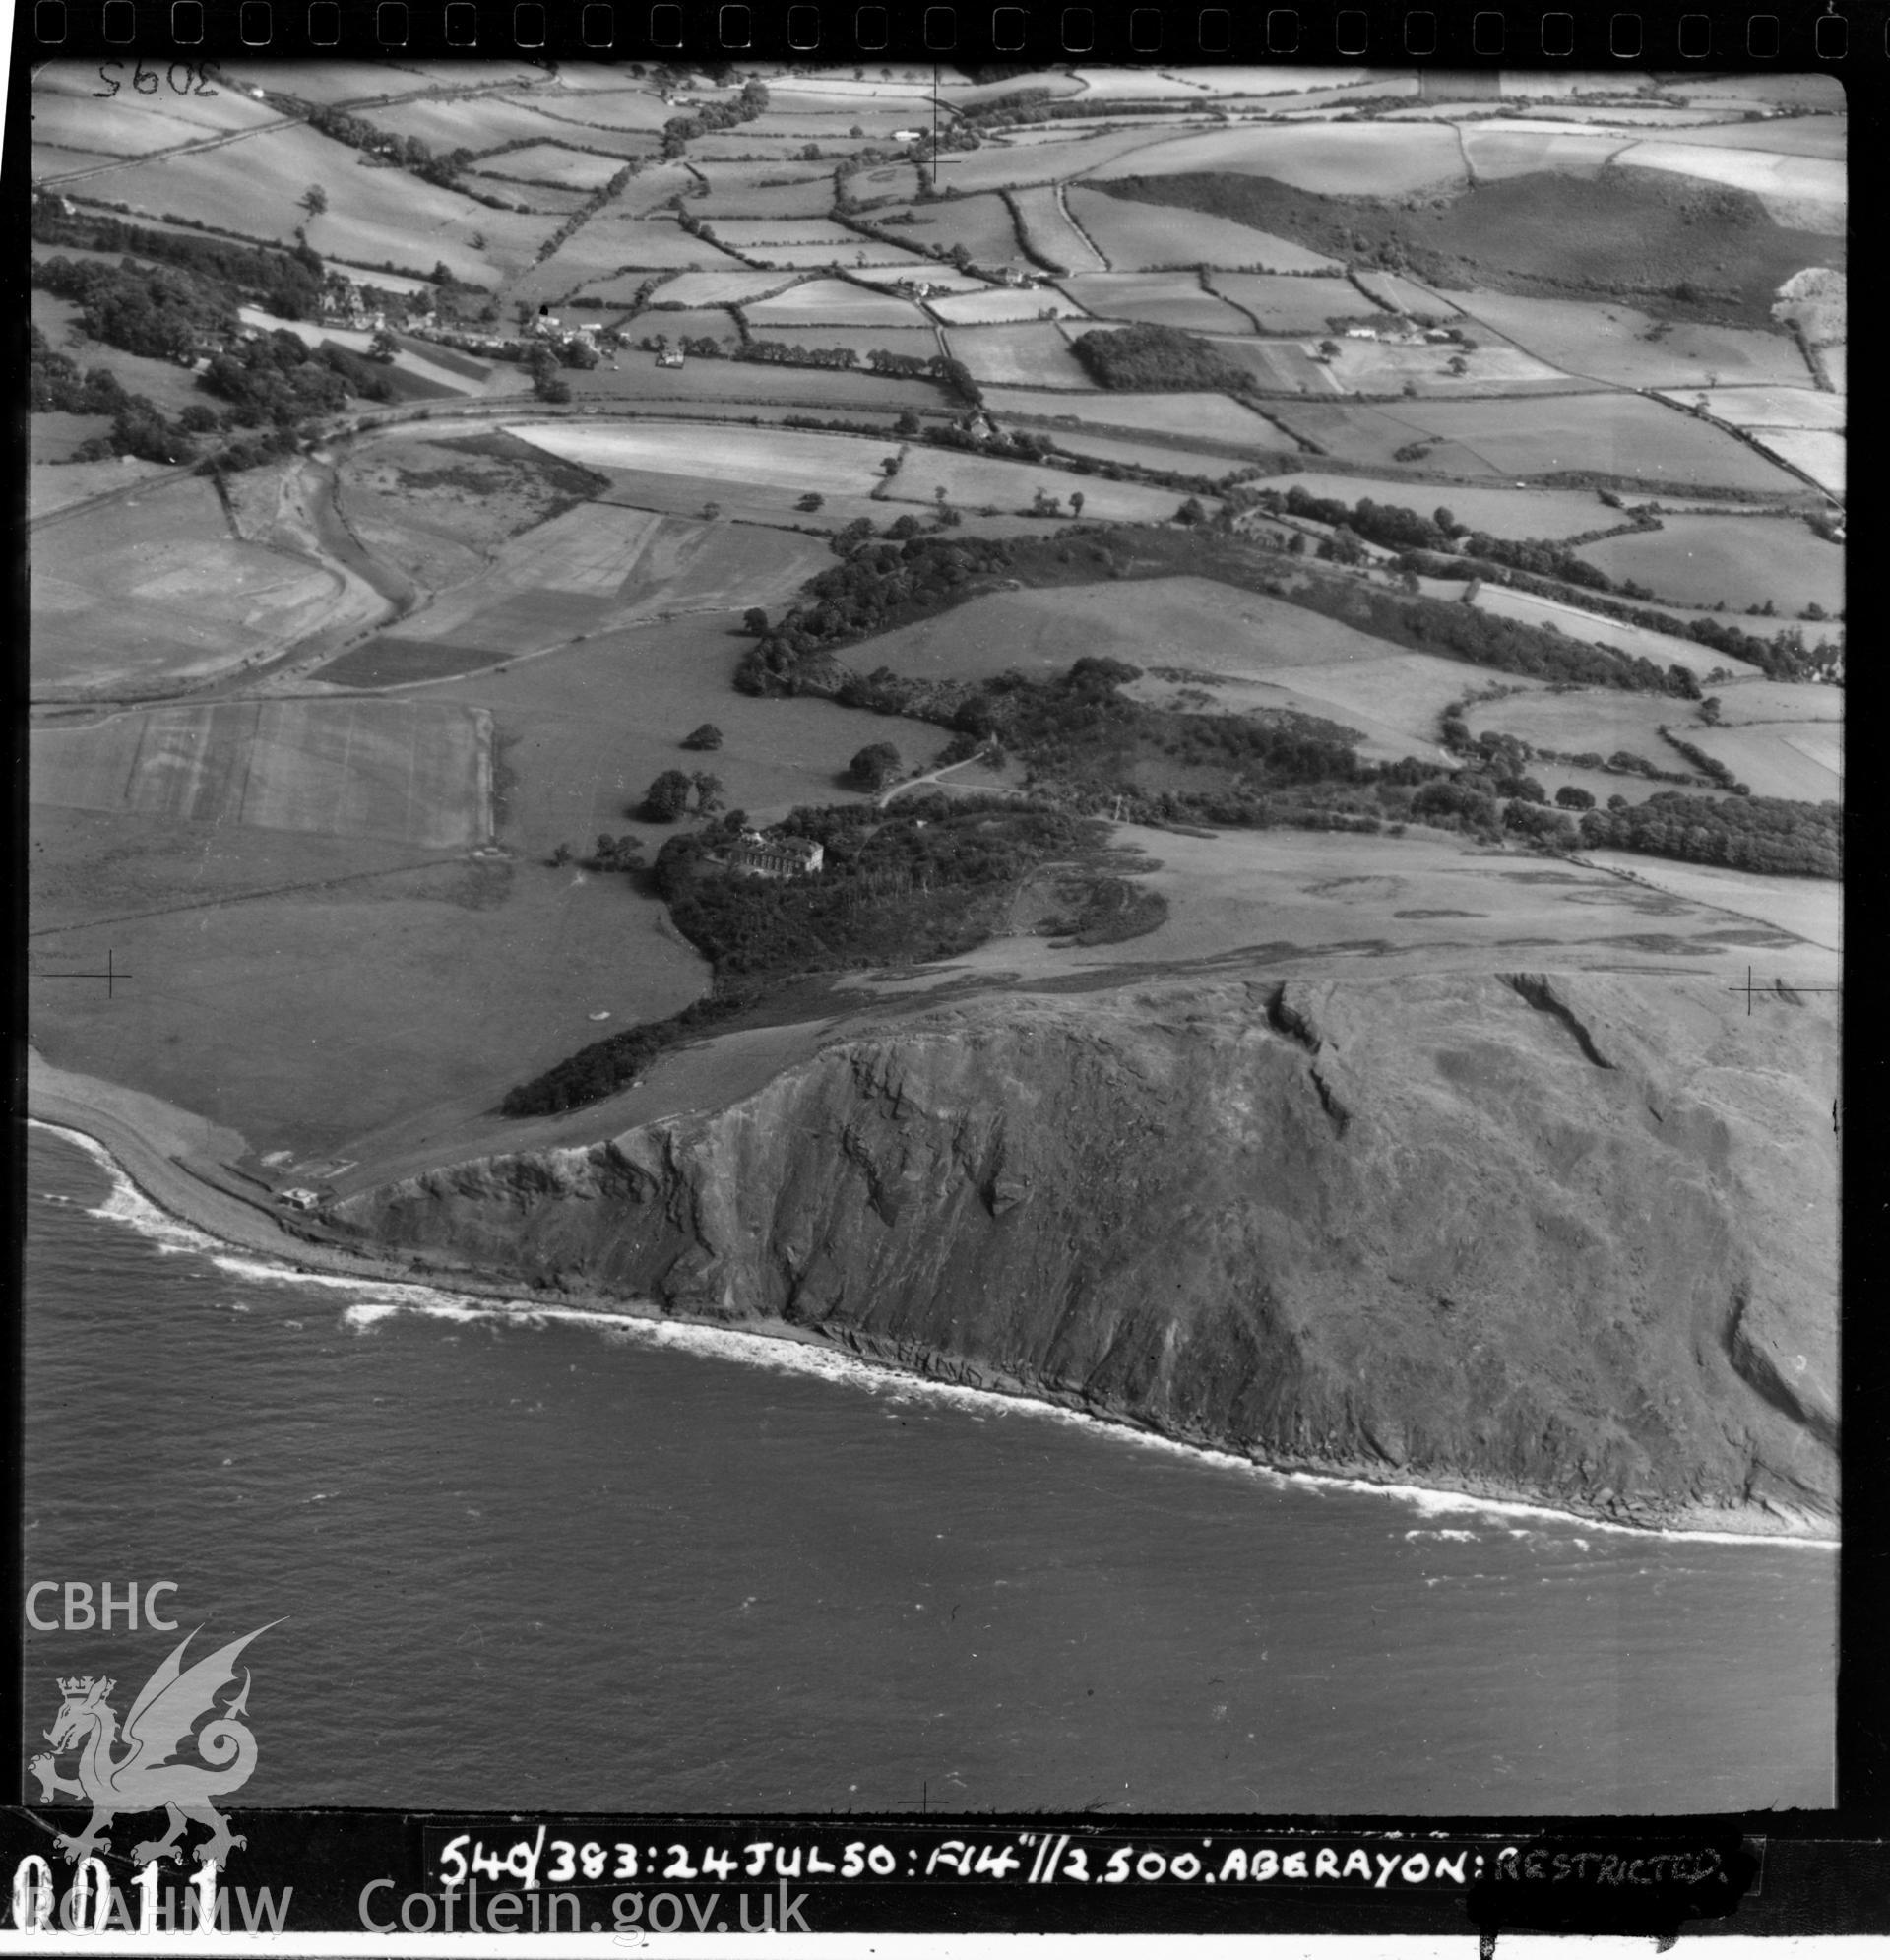 Black and white vertical aerial photograph taken by the RAF on 24/07/1950 centred on the south end of Tan y Bwlch beach near Aberystwyth.